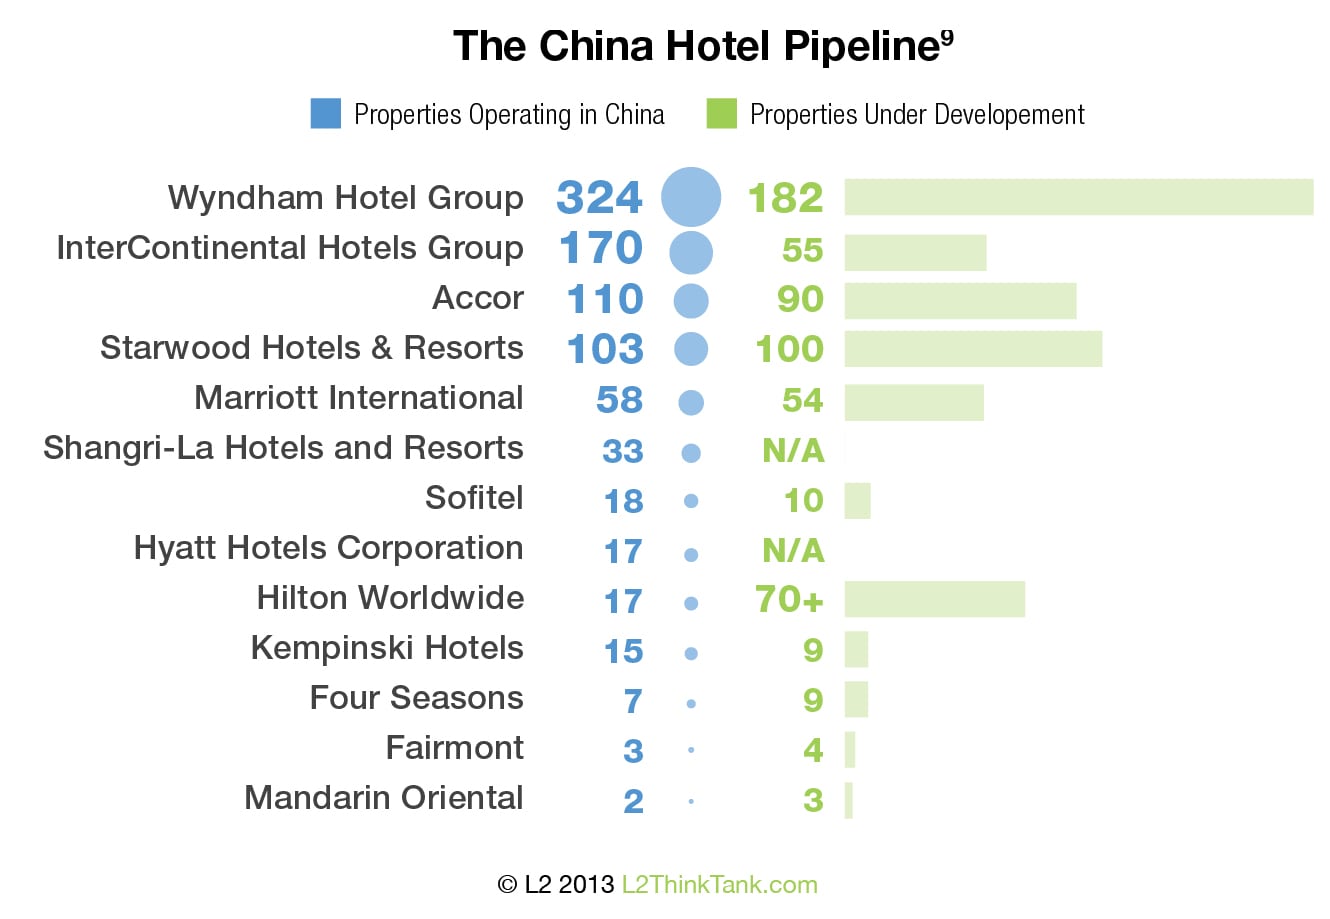 The China Hotel Pipeline